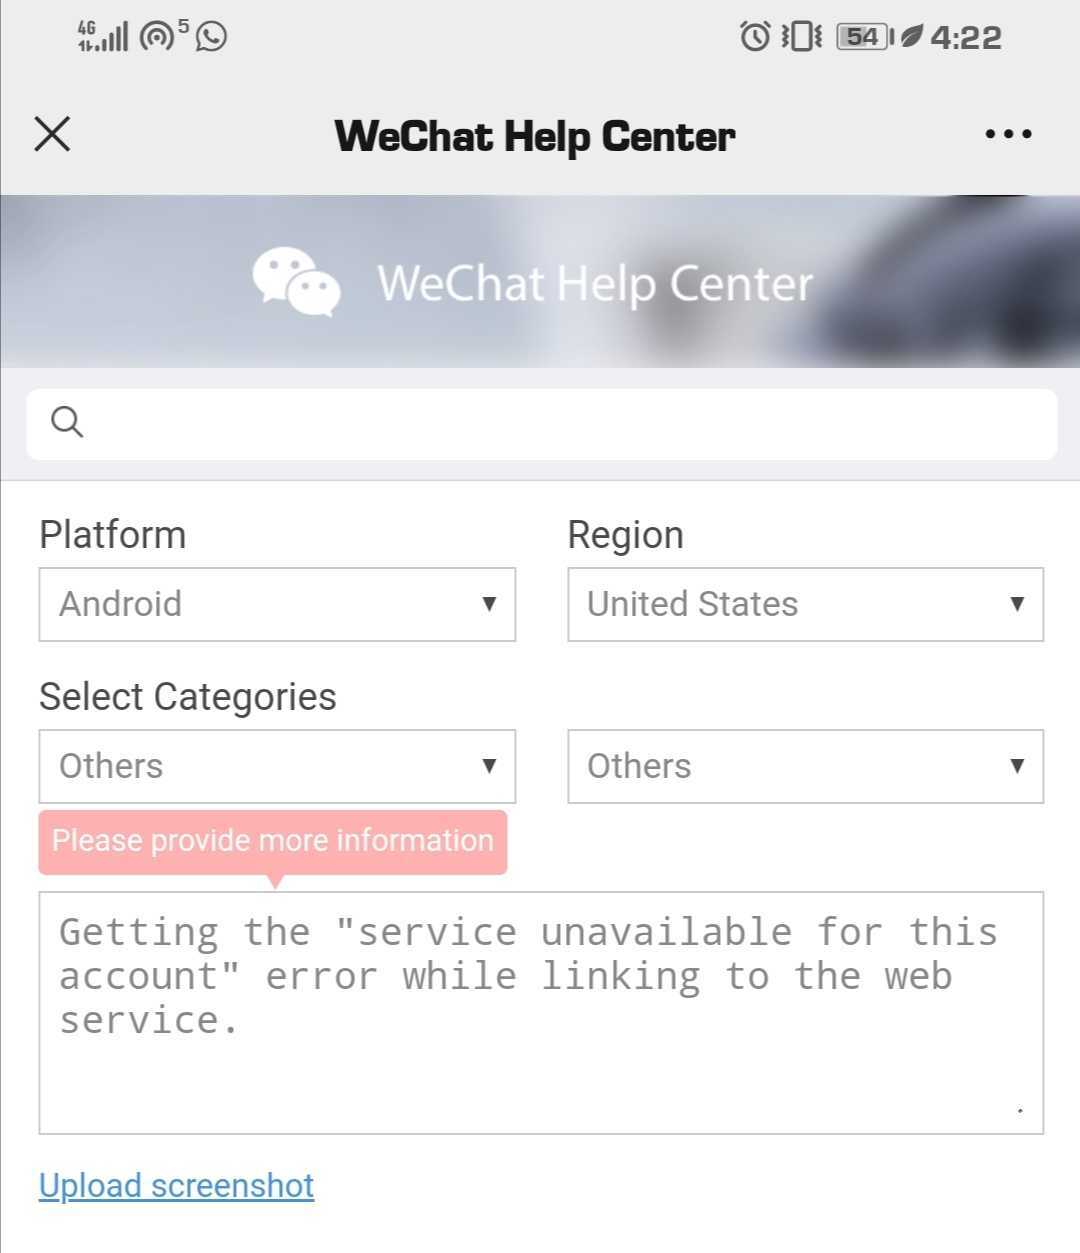 Submitting unblock appeal on WeChat help center